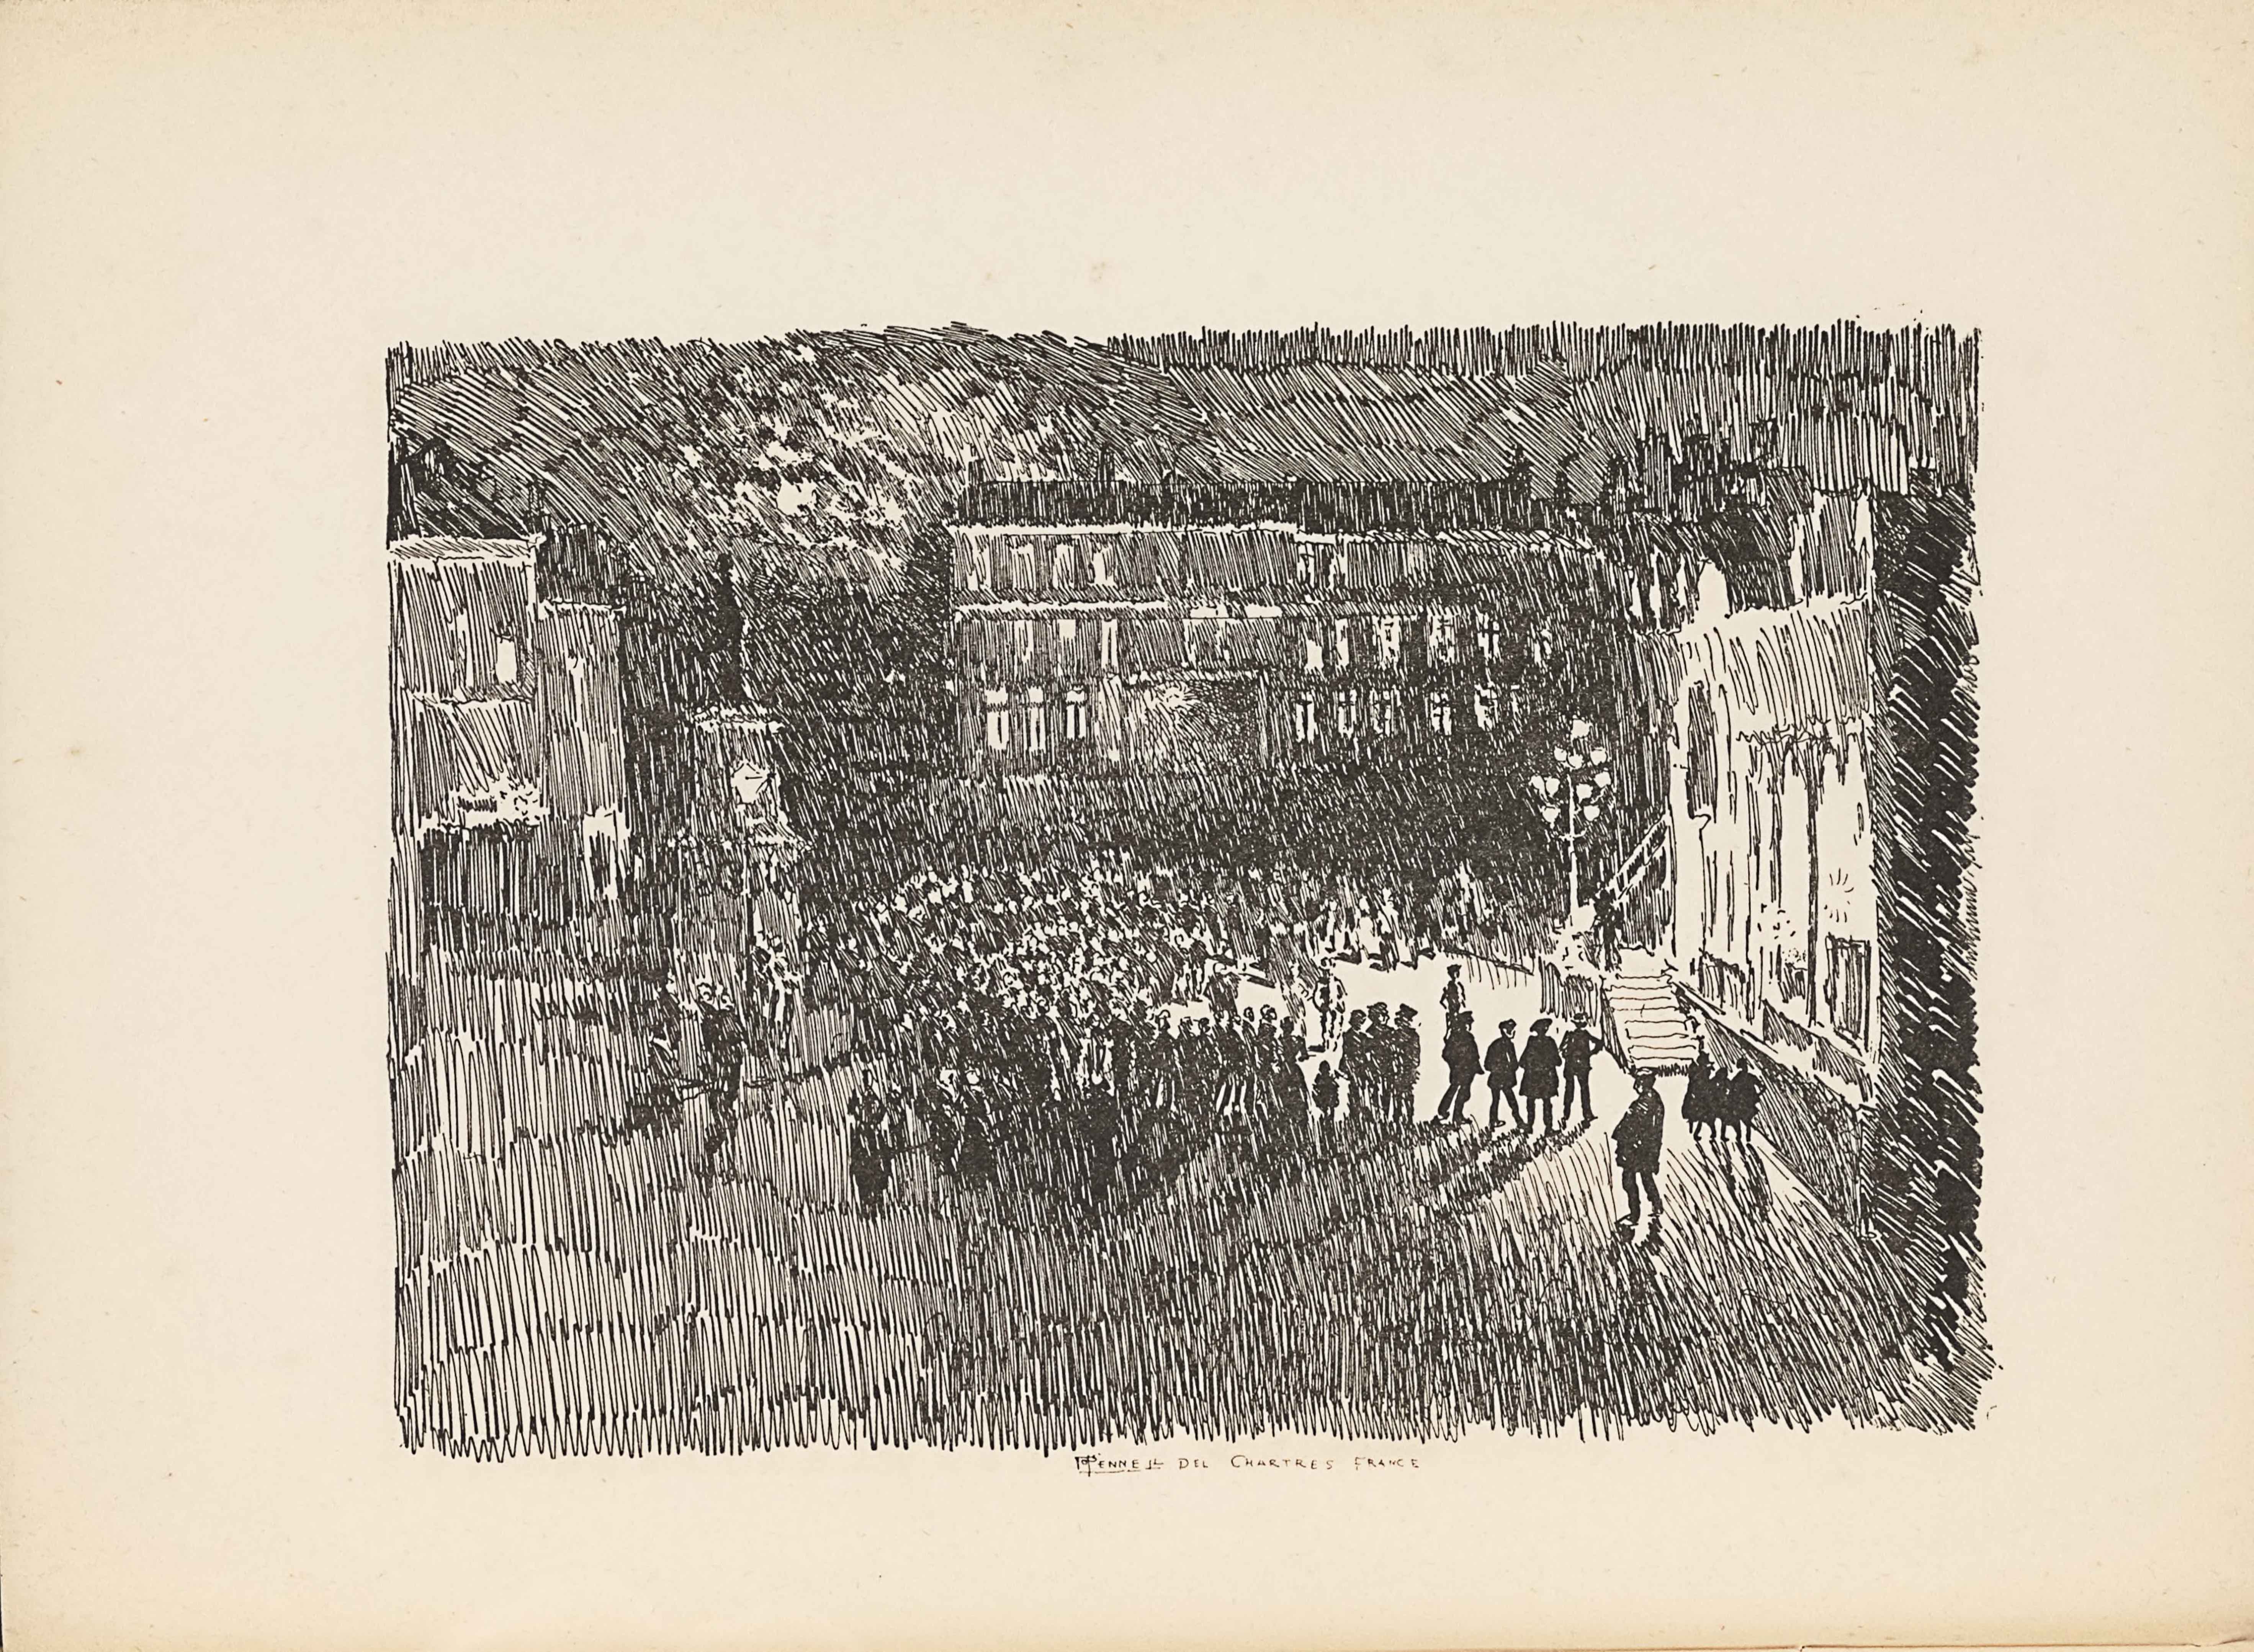 The line-block reproduction of a pen-and-ink drawing by Joseph Pennell is in landscape orientation. The image shows a city square with a gathering of people facing a person standing up on a staircase. There is a darkness to the image because of the drawing style, which is comprised of a series of vertical and diagonal lines drawn in a hatching formation. On the left side of the image is a series of vaguely outlined buildings, which reach up to three-quarters the height of the page. Slightly to the right of the buildings is a clock tower with a tall pointed roof. To the right of the clock tower is a group of people standing, visible by their light and circular heads between dark vertical lines. The group is formed in a semi-circle and turned to face towards the right side of the image. In the background of the group is a row of buildings in a horizontal line across the top third of the page. The buildings have three floors with a window appearing at each floor height and consistently all the way across horizontally. The buildings are all conjoined and have a shared black roof. The semi-circle formation of people on the ground are lit by a tall street lamp with about six lights. The light is beside the steps that lead to the front of a building that takes up the height of the right side of the page. A person standing on the steps appears as a dark figure underneath the lamp. There is a small group of people standing in front of the steps on the foreground side away from the rest of the large group. The building on the right side of the page is the only light coloured building in the area. The dark foreground is, made entirely of hatched and vertical lines. The background behind the buildings is made of a series of hatched vertical lines as well, but these are closer together and darker. There is no borderline around the outside edge of the image. The image edges are instead made of vertical lines ending roughly in a straight line. Centered underneath the image is the text: “JPENNELL DEL CHARTRES FRANCE” [caps].